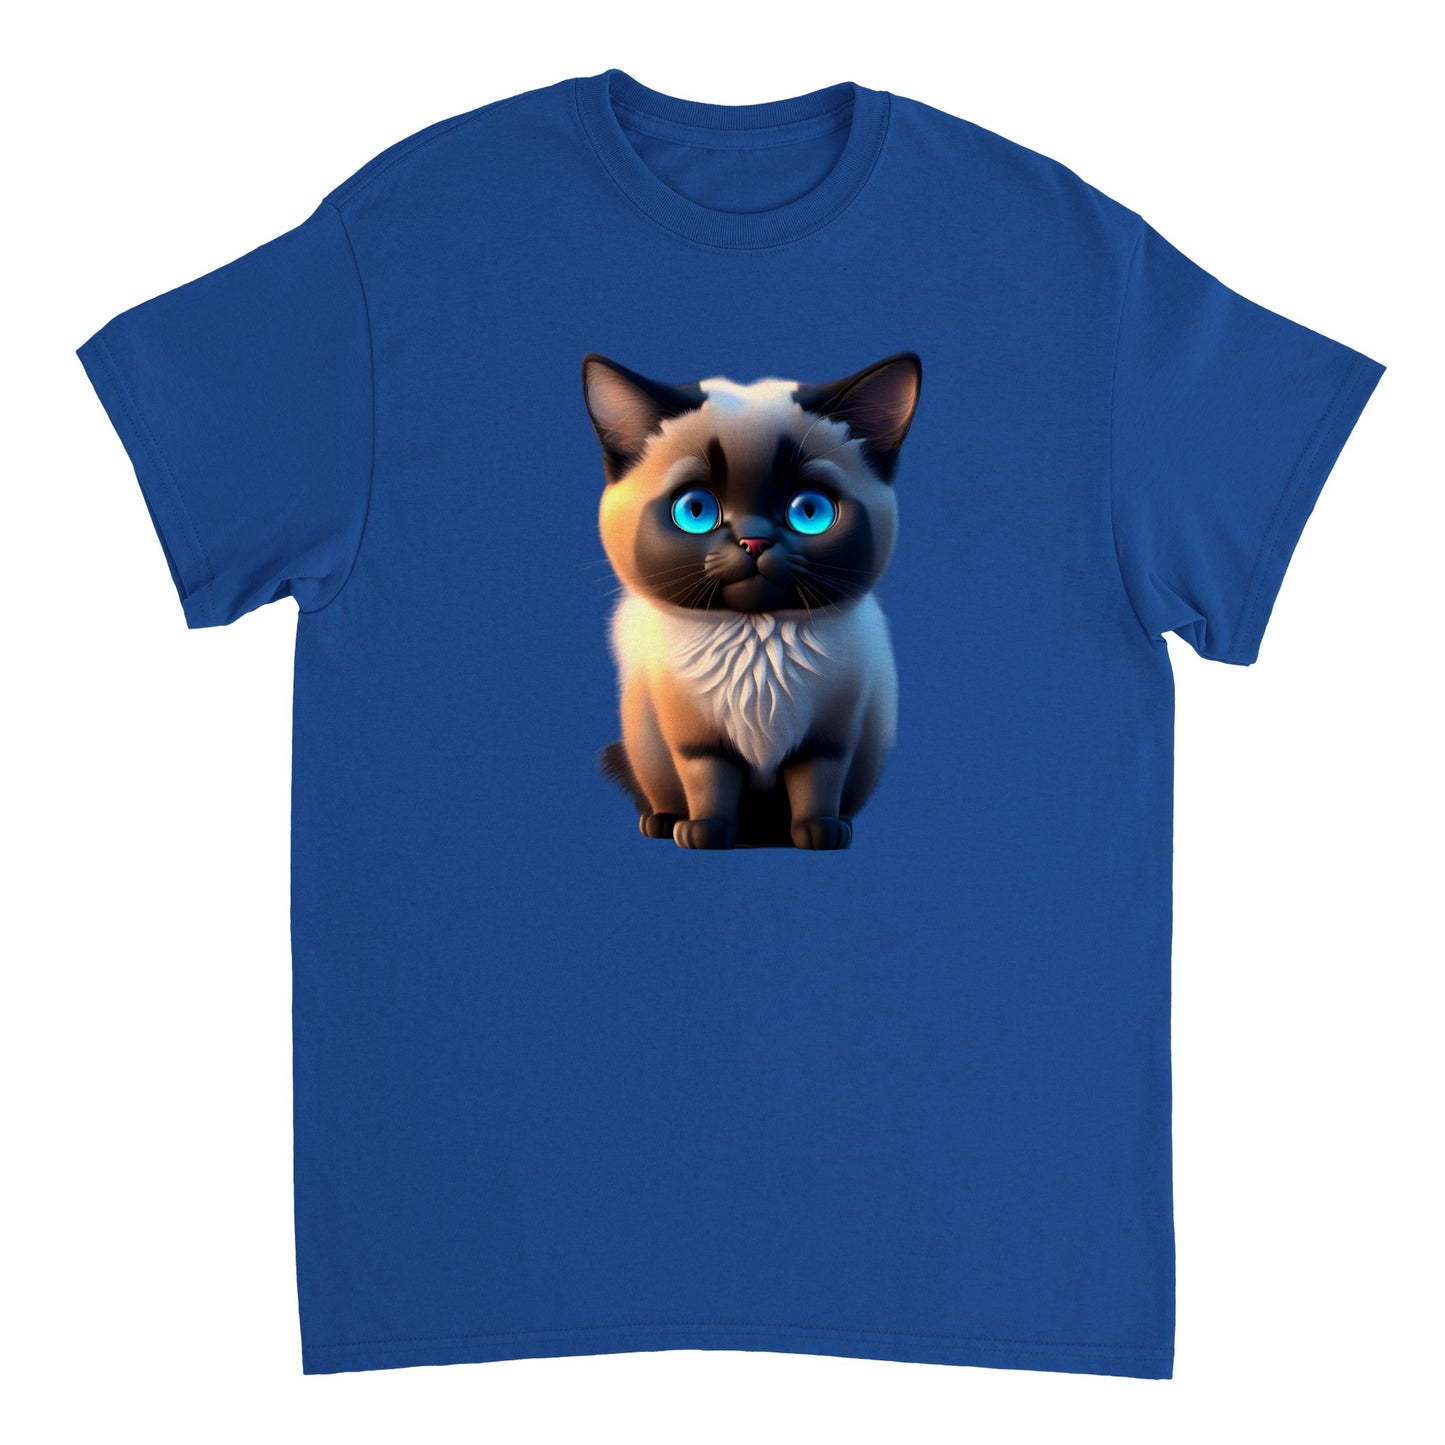 Adorable, Cool, Cute Cats and Kittens Toy - Heavyweight Unisex Crewneck T-shirt 41